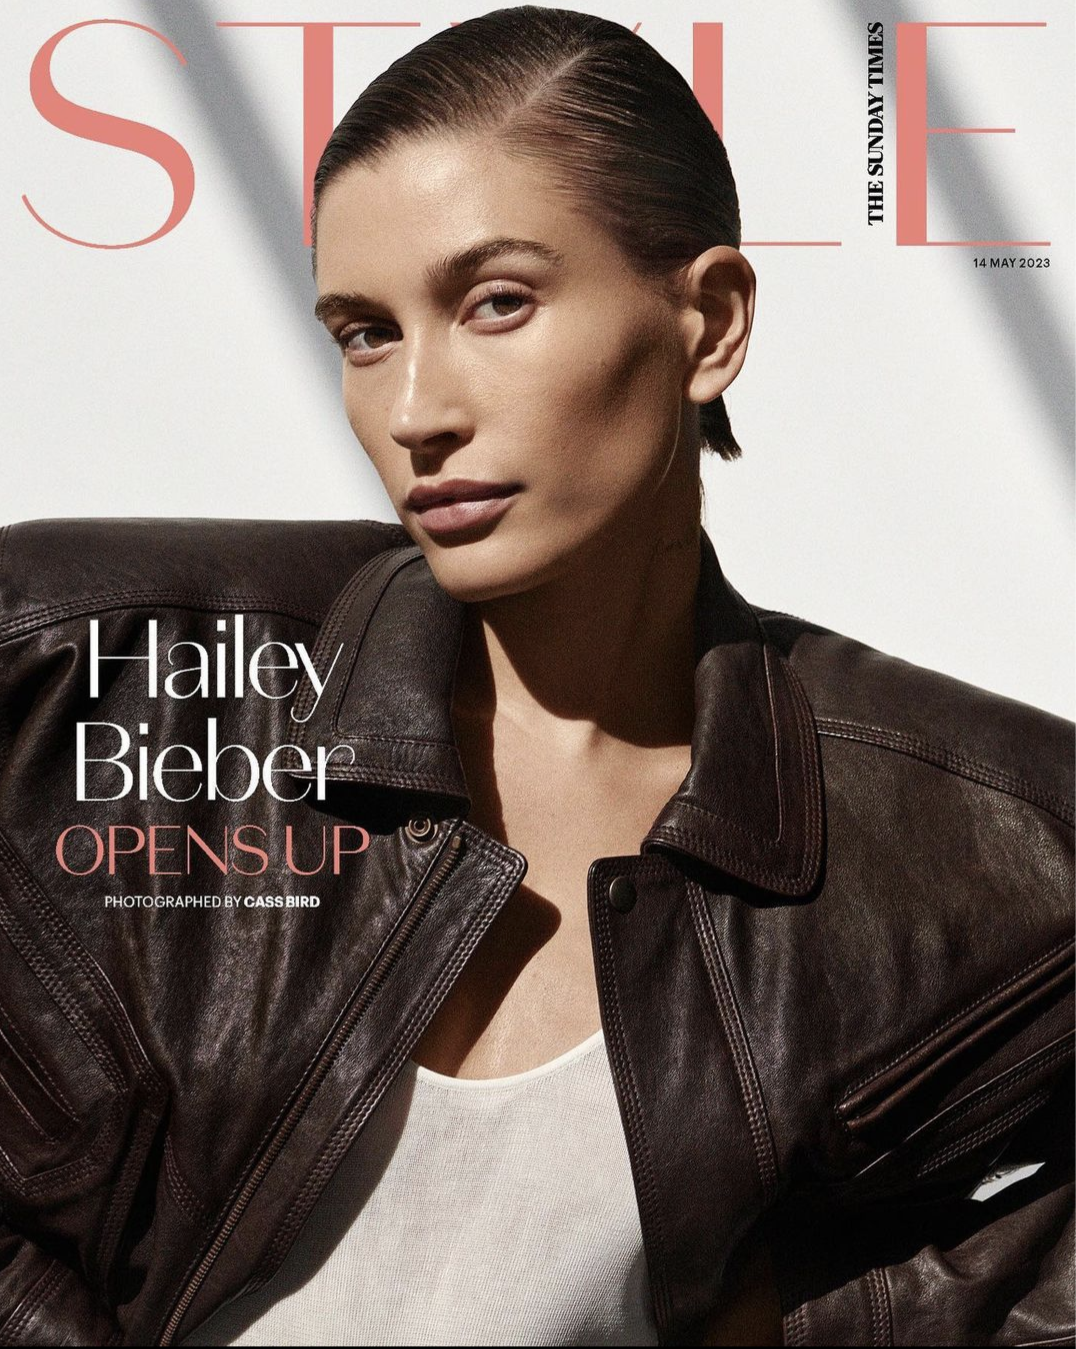 STYLE Magazine 14/05/2023 HAILEY BIEBER COVER FEATURE